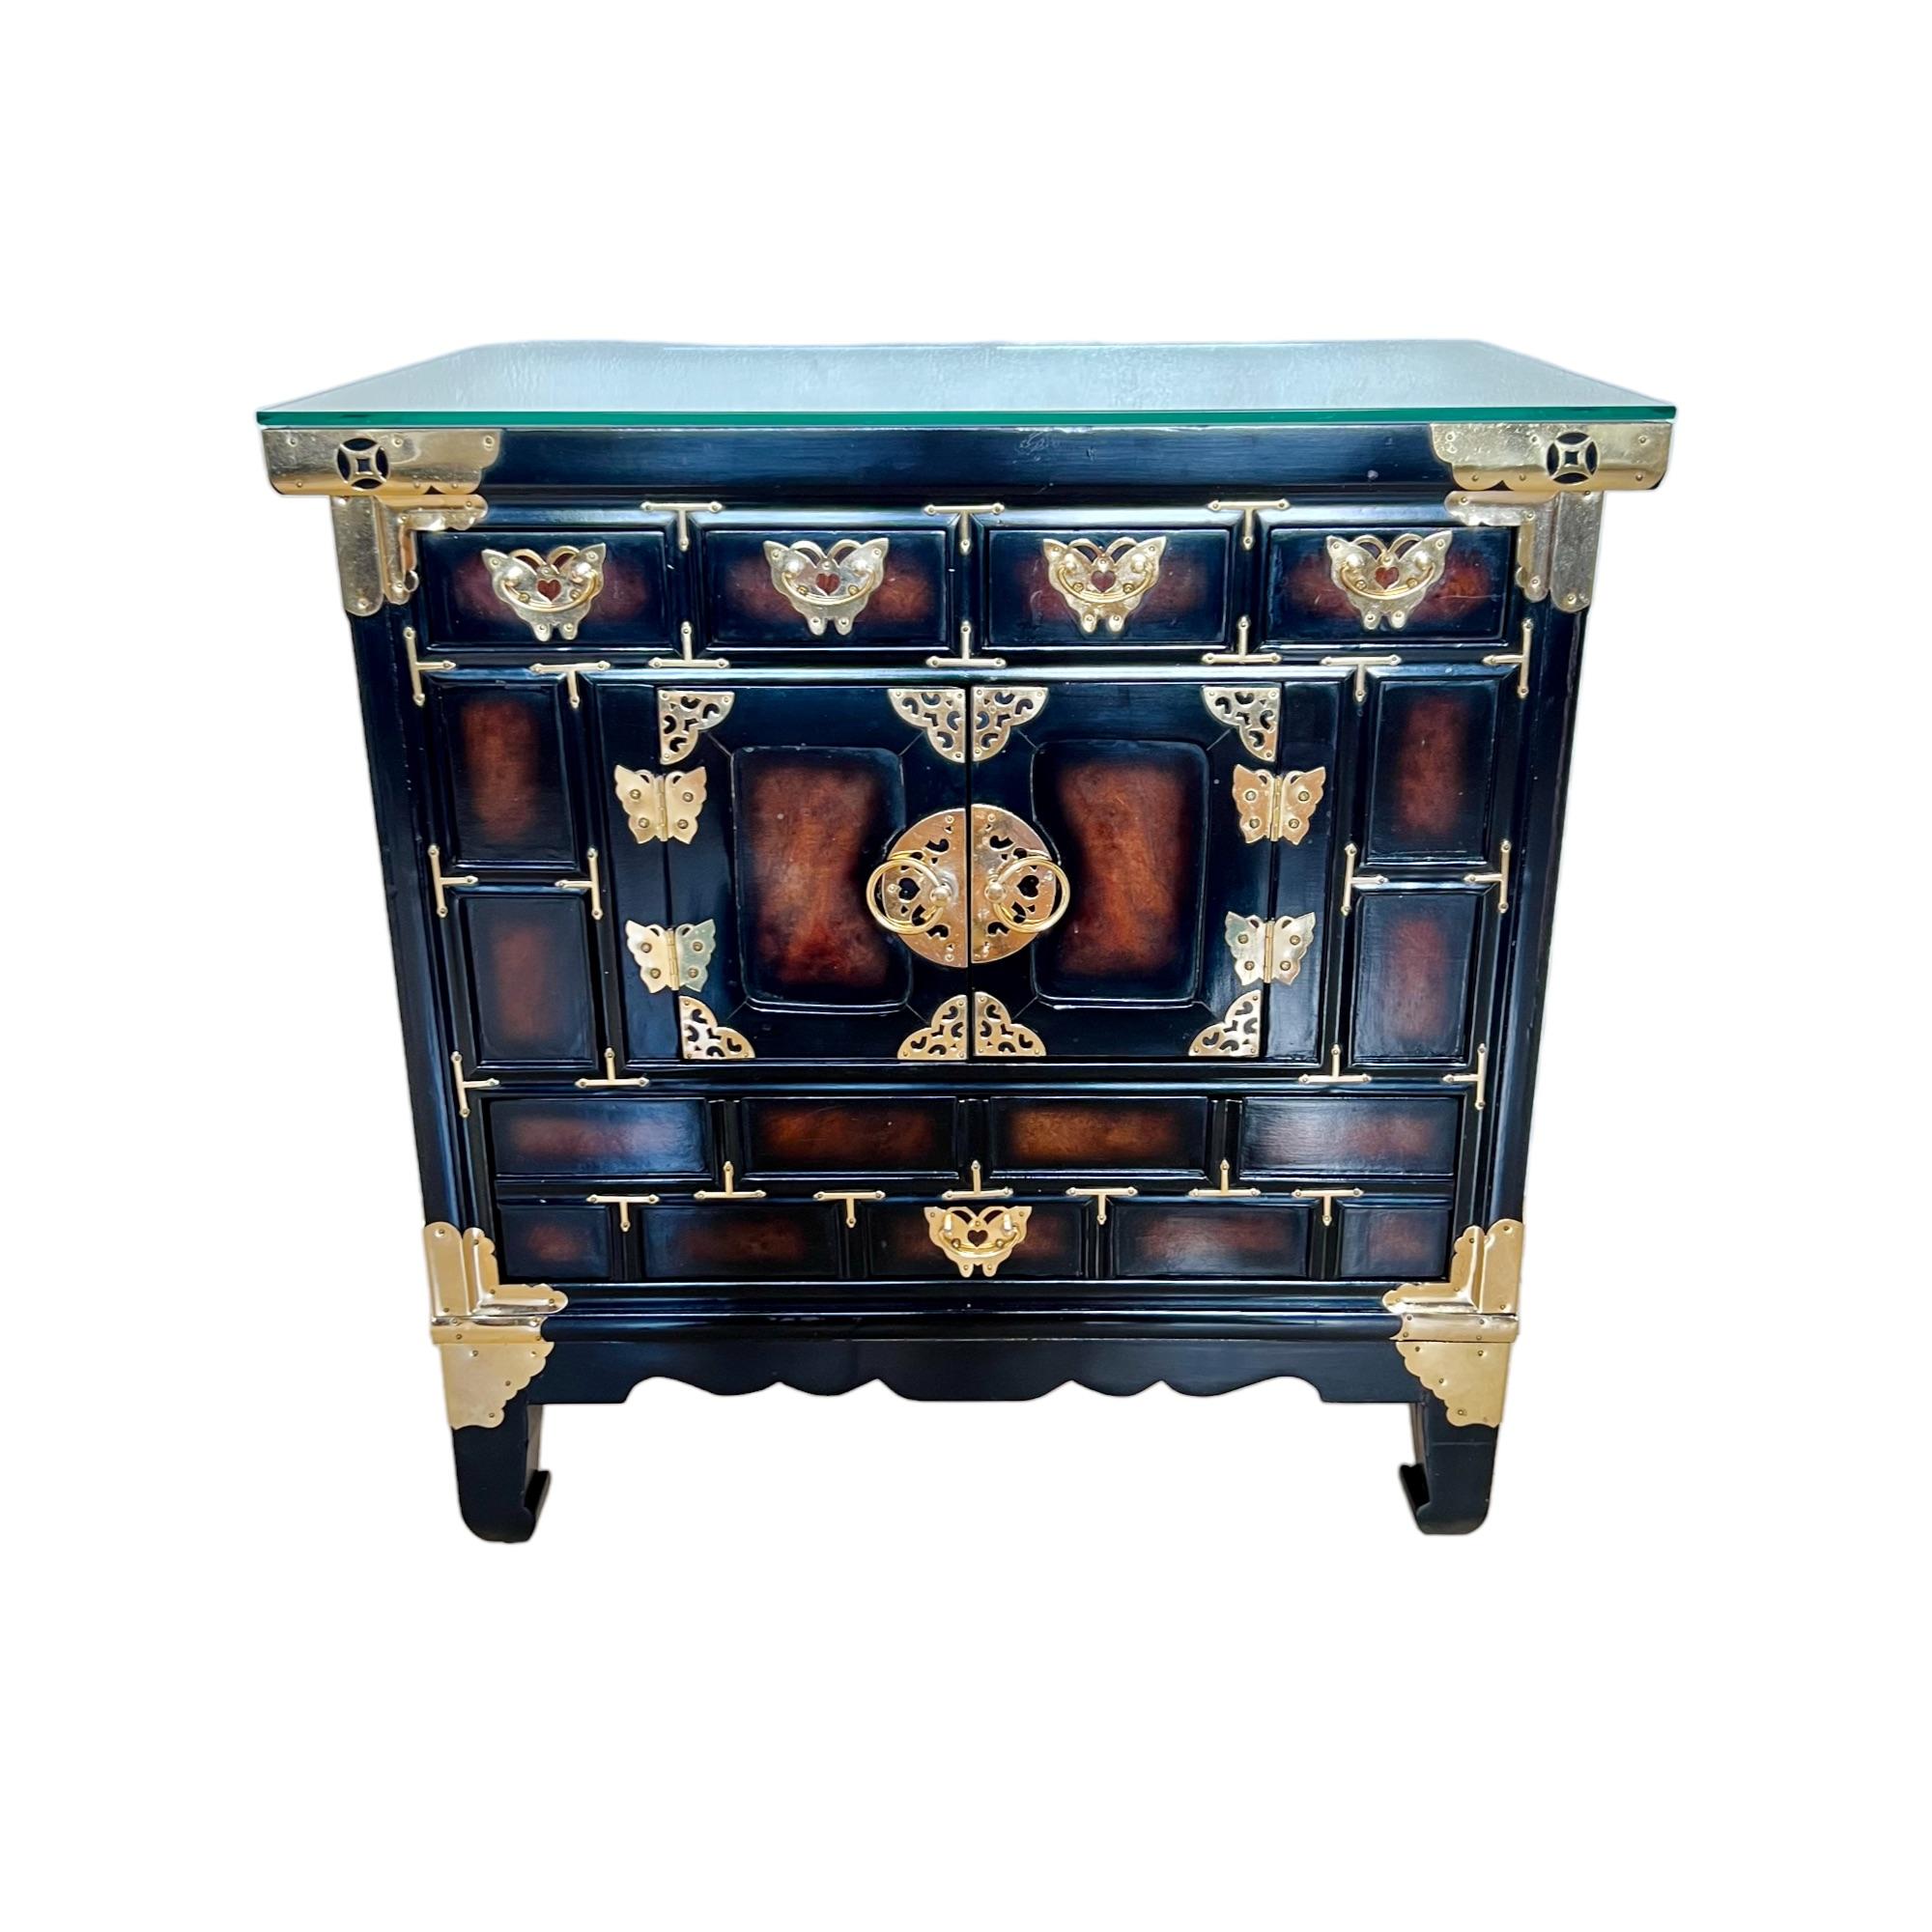 This vintage 1970's chinoiserie tansu style Asian nightstand or small storage chest cabinet is constructed of wood and has a Japanned black 'lacquer' finish with faux bois burl paneling on the top, sides, and drawer & door faces. It is raised on